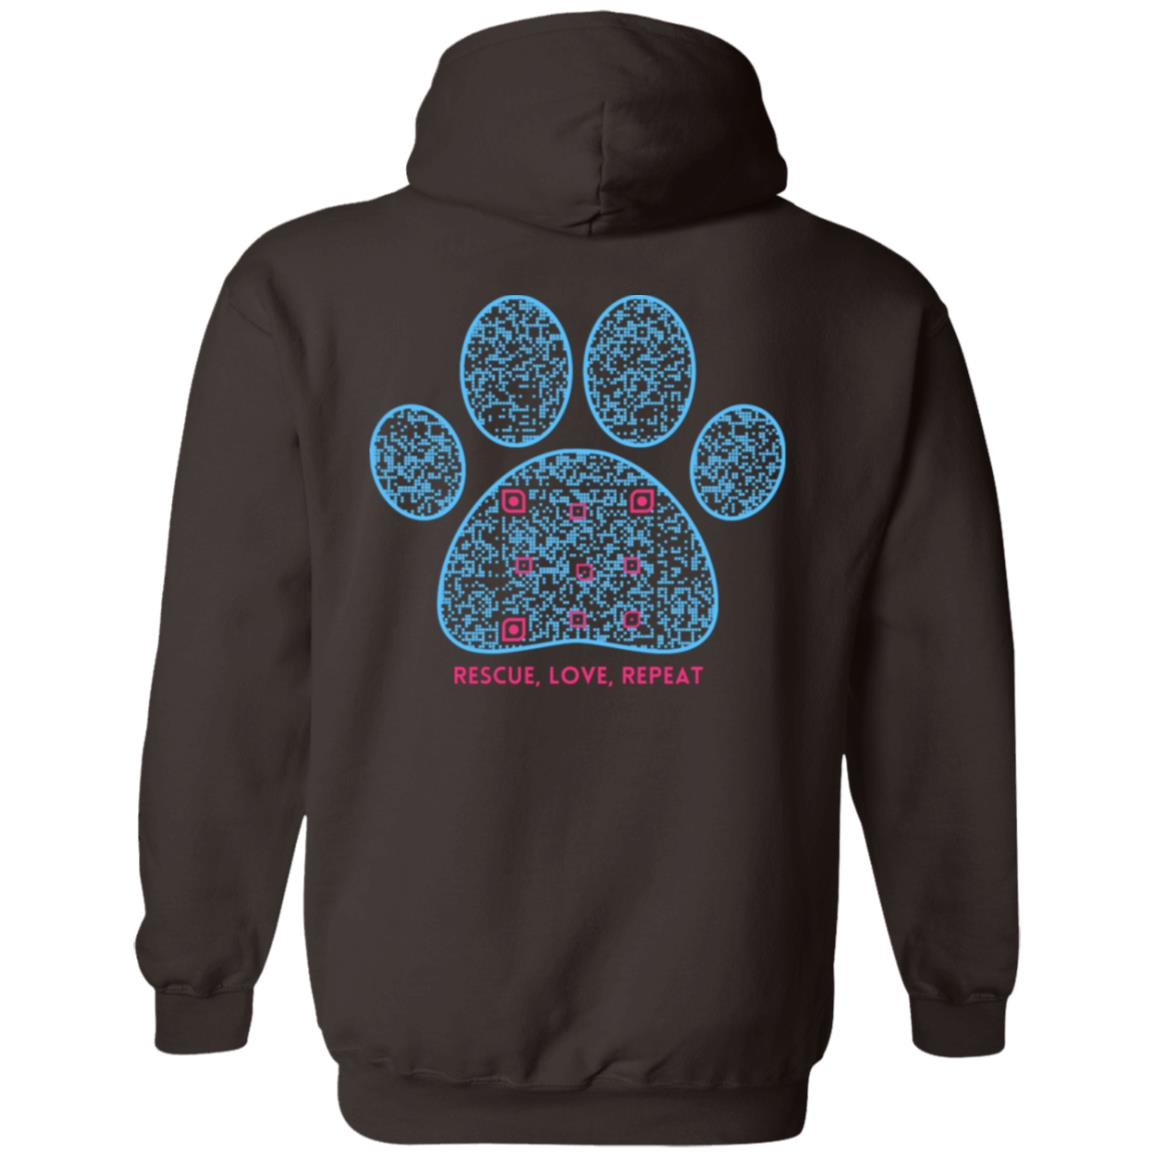 Paws for a Cause - HopeLinks QrClothes